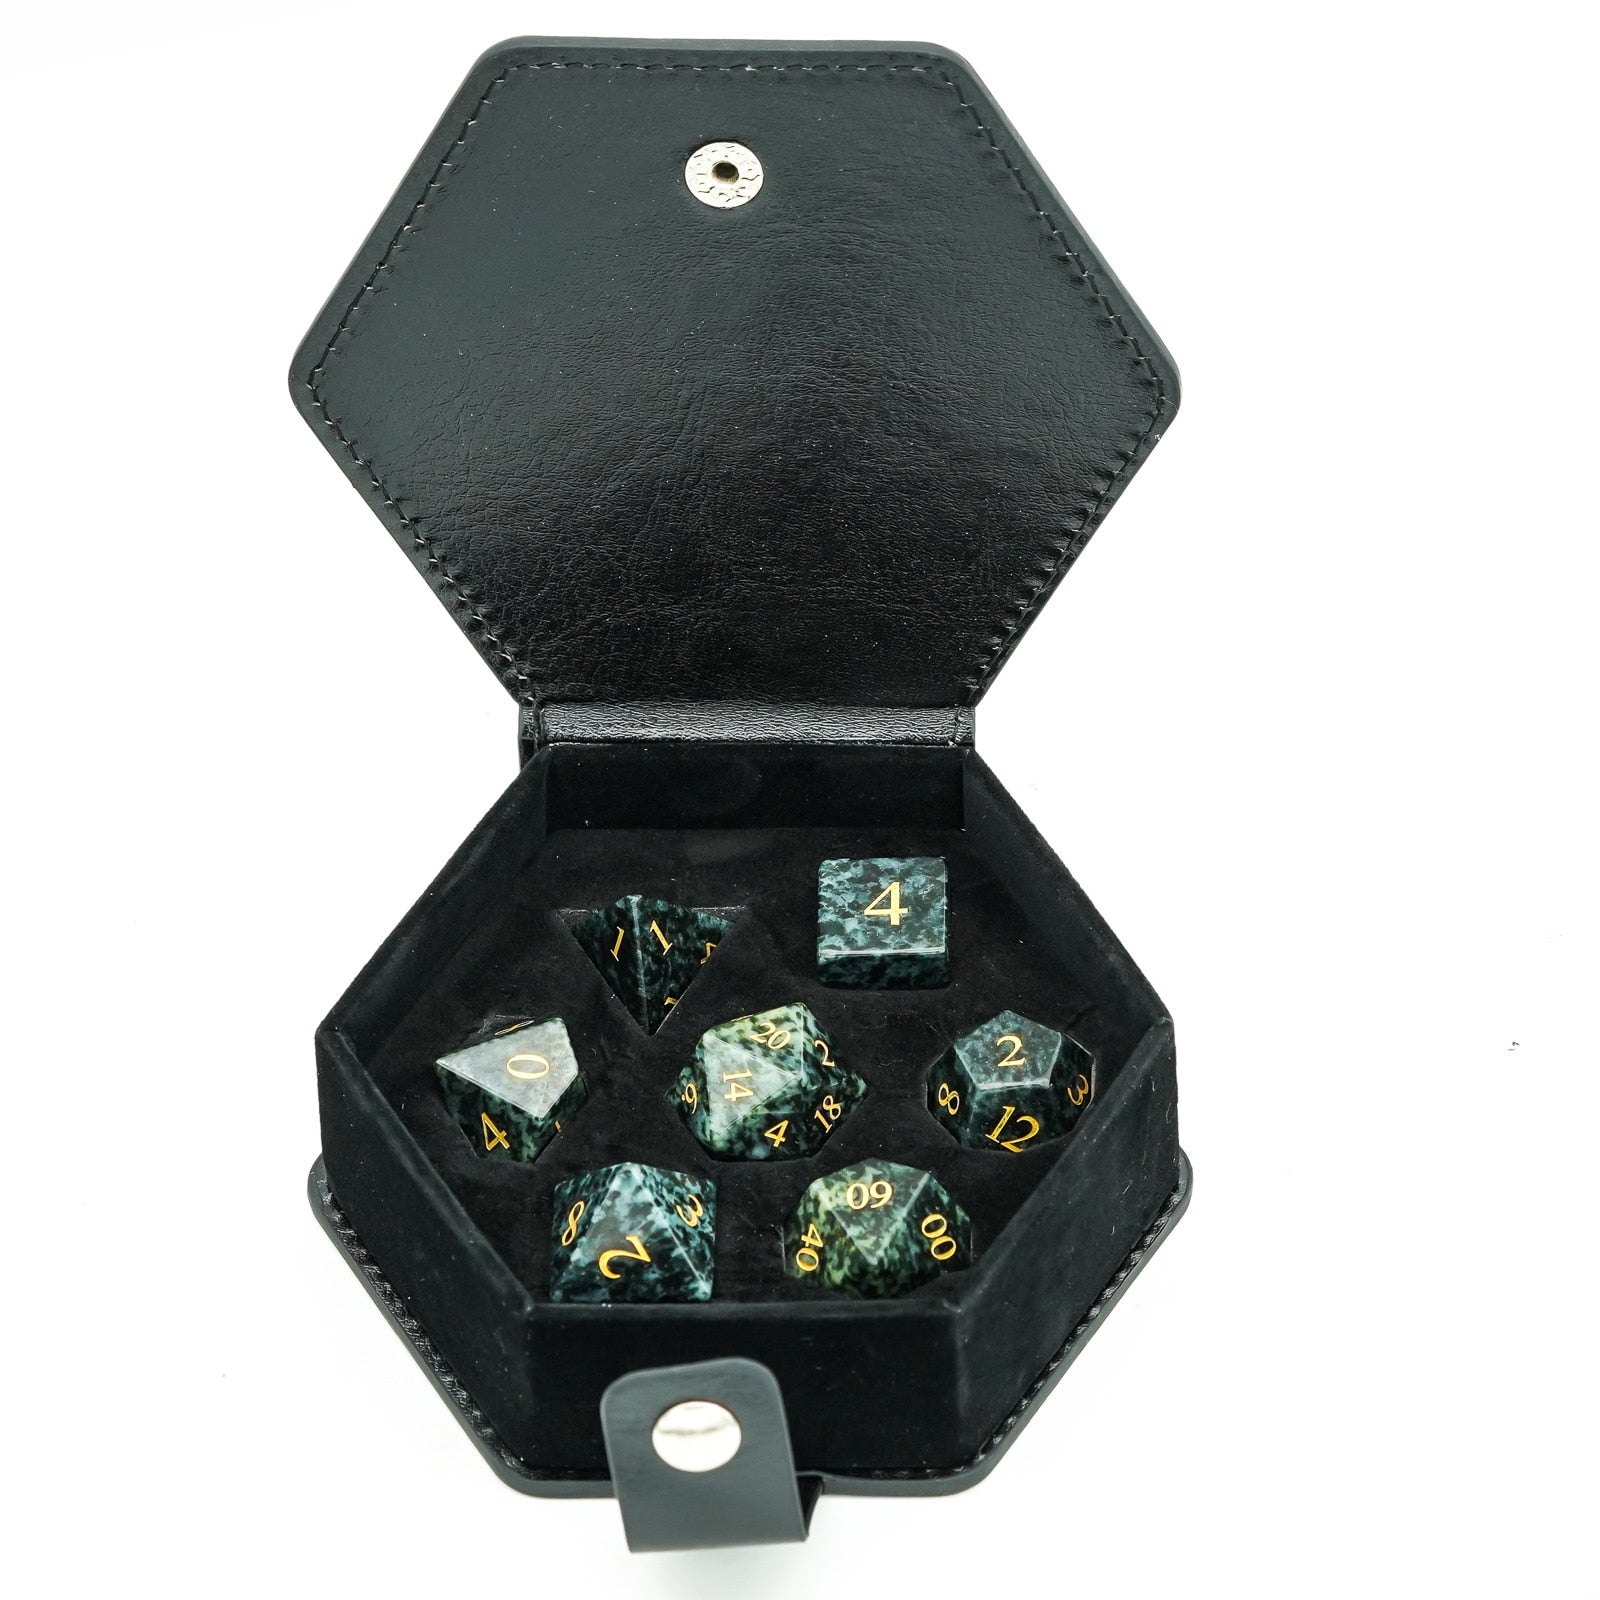 seaweed tangle stone dice set in leather travel case